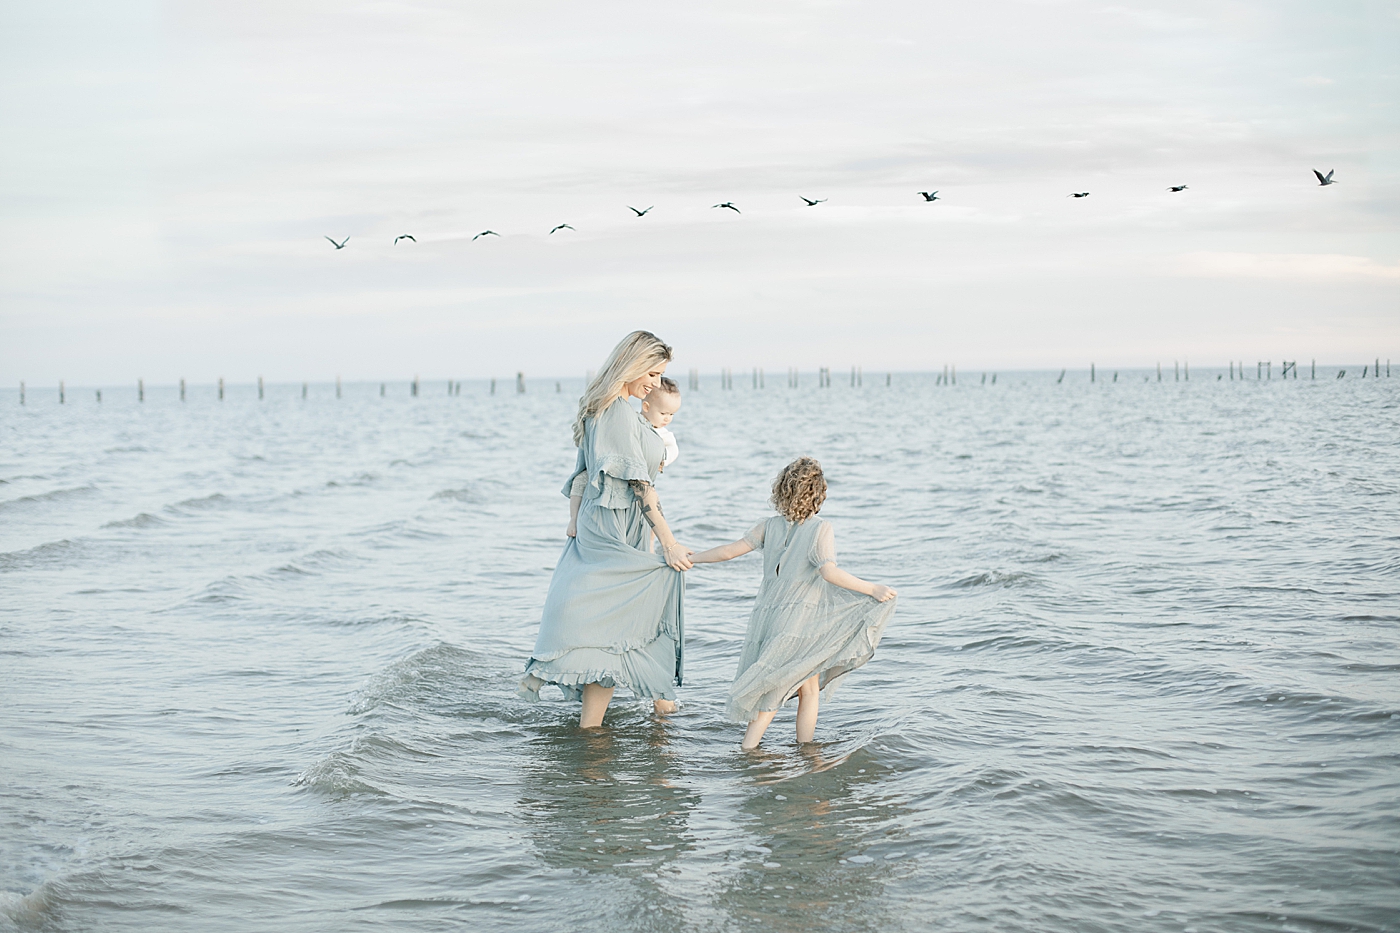 Mom walking with children in the ocean | Photo by Little Sunshine Photography